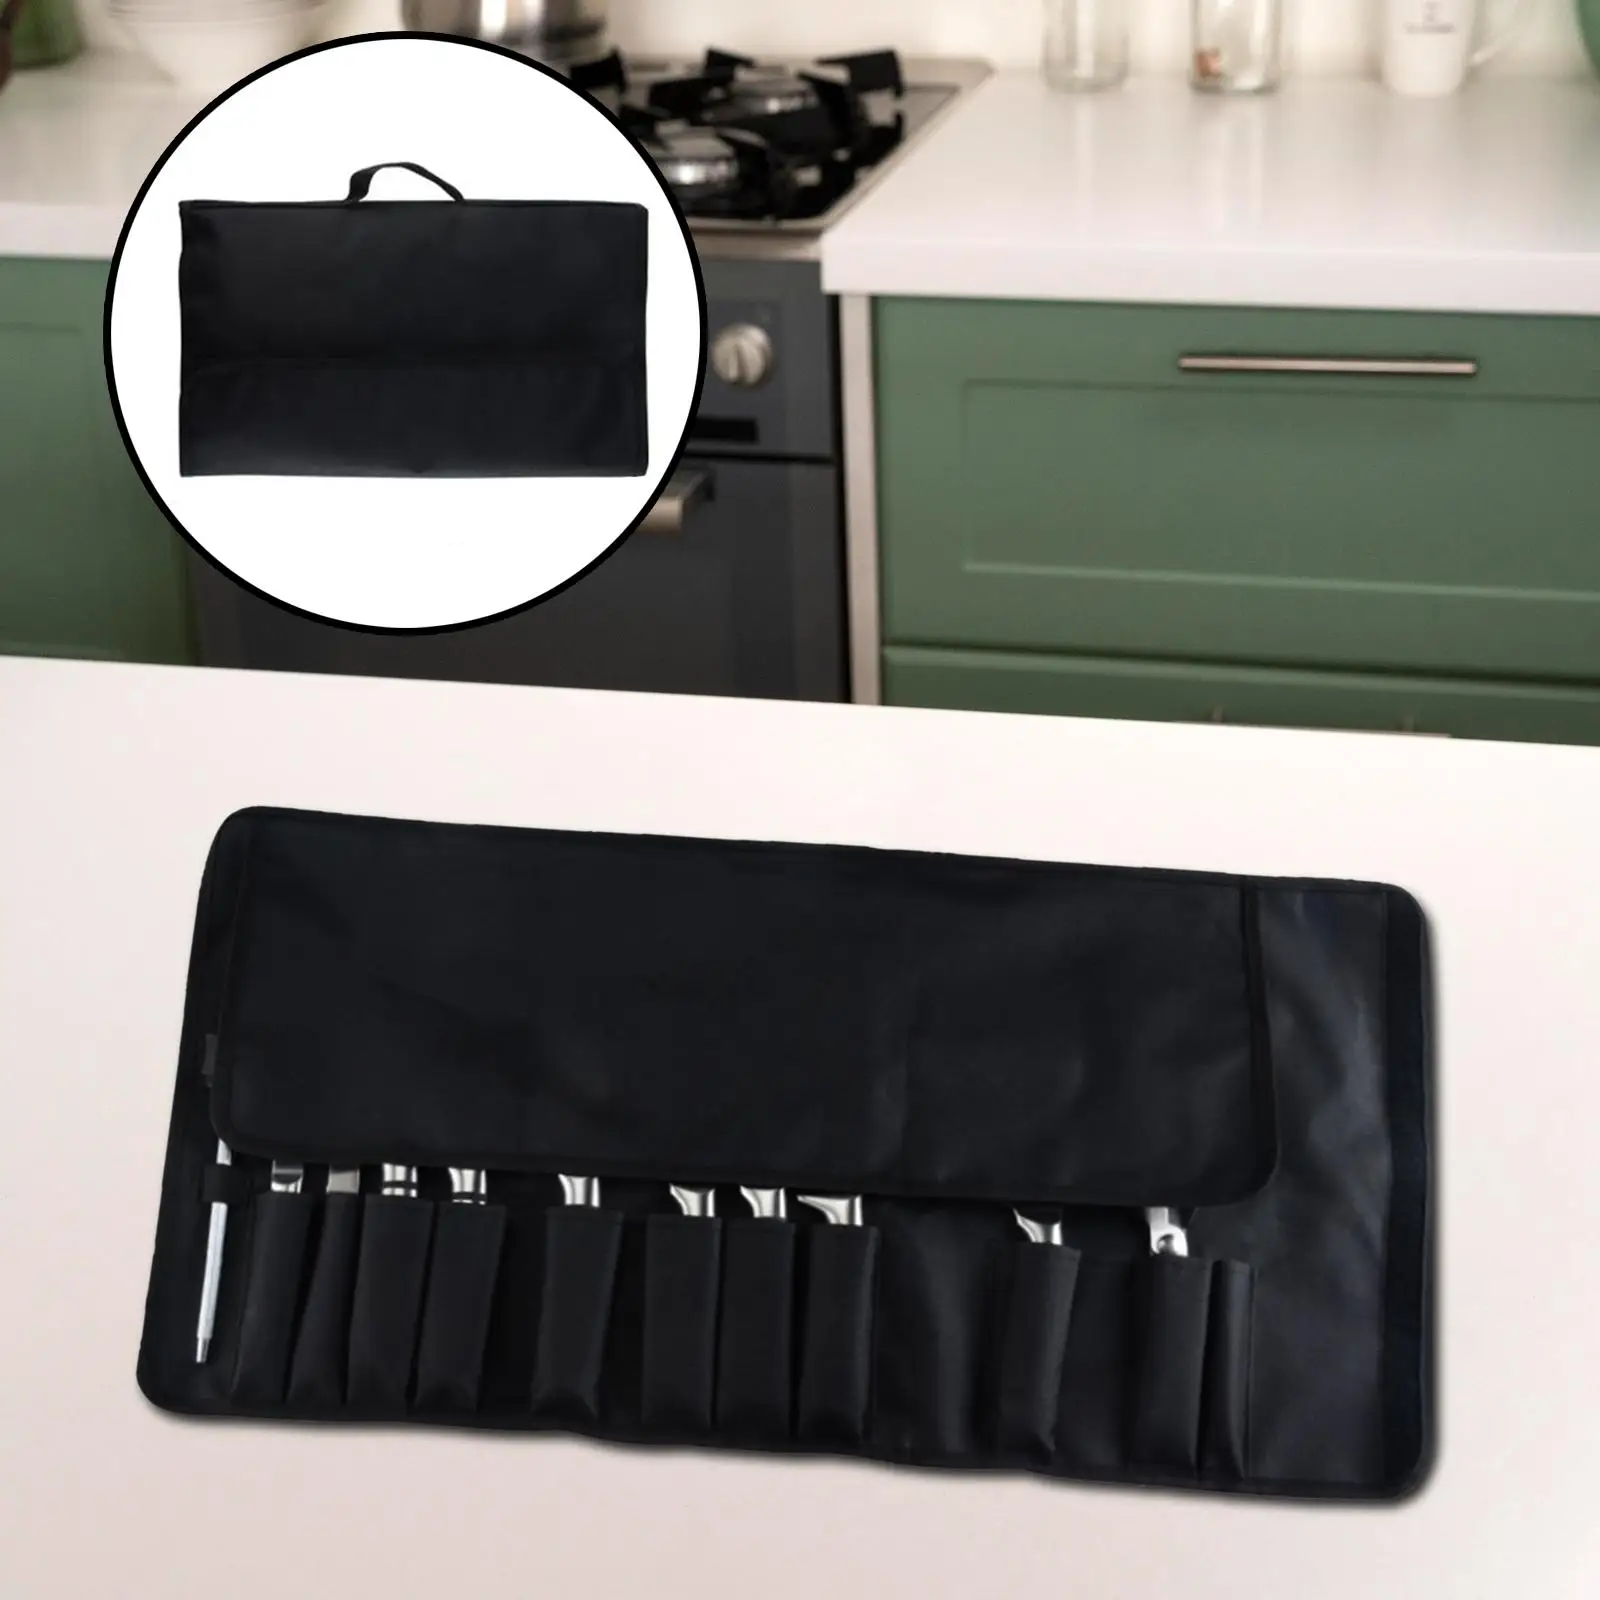 Chef Bag Tool Bag Carry Case Bag Cooking Tools Storage for Holiday Gifts